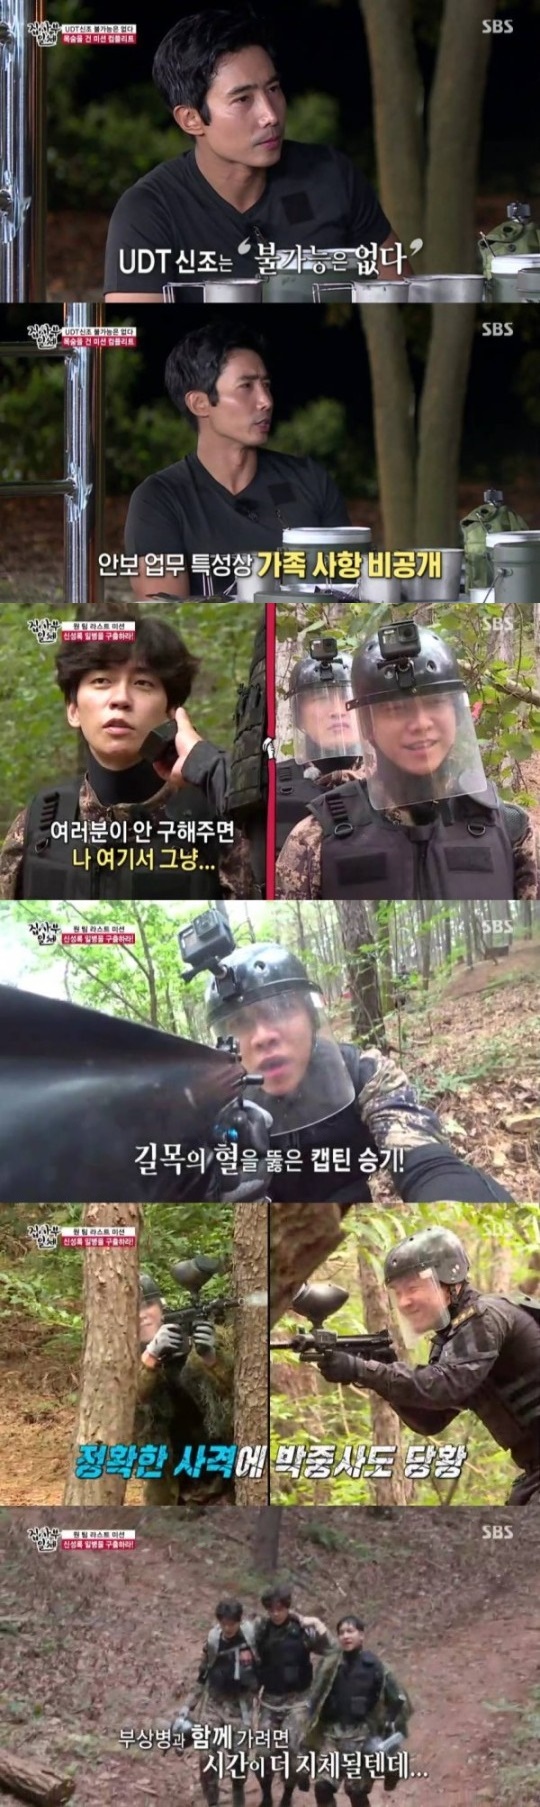 All The Butlers Lee Seung-gi, Yang Se-hyeong, Shin Sung-rok, Jung Eun-woo and Kim Dong-Hyun became perfect unity and successfully completed the mission.According to Nielsen Korea, the ratings agency, All The Butlers, a SBS entertainment program broadcast on the 20th, recorded 5.7% of households ratings (based on the second part of the metropolitan area), 3.9% of the 2049 target ratings, which are important indicators of advertising officials and lead the topic, and the highest audience rating per minute rose to 6.9%.On the day of the show, UDT legend Lee Geun Captain was shown training to become One Team.The members asked Lee Geun-Captain about UDT training, and Lee Geun-Captain said, UDT is not impossible.We can do any operations because Europe is a trusted unit, he said, uttering the UDTs creed of turning the impossible into possible.When asked, What does it feel like when you are put into practice? He said, There is no time to feel fear or fear.No matter how perfect the operations are, if the crew is perfect, someone can die if they are not lucky, he said, and Im focusing on how to succeed Operations and see if my crew can come back safely.Lee also said, I am proud of the fact that the soldiers have a small salary, but all the privileged men think they have the best job, so I am proud of them every time I see them.I know that if my team does operations, they will protect me without one, and if I get injured, they will take me to the end, he said, admiring the members.UDT gun training was then launched.Lee Geun revealed the actual bulletproof vests and training weapons used in the performance of operations, and focused the attention of the members. Yang Se-hyeong, who learned guns through games, laughed because he penetrated guns and various terms.Lee then predicted a close combat training, an essential training course for Operations with combat combat.The important thing is team tactics, not personal skills, he said, and invited Park Soo-min, a former 707-member army officer, as another instructor.Park said, You can think that the sea is UDT and the land is 707 on duty.Park Jung-sa, who was a sniper, was surprised to say, I have a record of three consecutive times up to 1.8km in dispatch life, and It seems that it was the hardest time to fight while fighting the physiological phenomenon without moving for 4 nights and 5 days in such a position.After that, a full-scale close combat training began. Lee Geun-Captain cited teamwork as the key to success in Operations and announced that it was a training to strengthen faith and breathing among team members.Lee and Park have successfully trained quickly and accurately, showing a perfect sum even though they have not been matched in advance.On the other hand, Kim Dong-Hyun, who challenged the close combat training for the first time among the members, made a mistake and laughed with a smile.Meanwhile, early the next morning, news of Shin Sung-rok being kidnapped by the enemy flew to Lee Seung-gi, Yang Se-hyeong, Jung Eun-woo and Kim Dong-Hyun, who were taken to the mountain.The final mission given to them was to save Shin Sung-rok, who was kidnapped in the mountains over 3,000 pyeong, and return within 30 minutes.Members began searching the mountain in a group of two, following Lee Seung-gis opinion.It was not easy because the opposition forces were holding on to the mountain, but the members showed perfect teamwork as they learned in training and gradually got closer to Shin Sung-rok.In particular, Lee Seung-gi hit the opposition forces and pierced the road, and led the members to the captain.Then Yang Se-hyeong and Kim Dong-Hyun became In-N-Out Burgers, while Lee Seung-gi and Jung Eun-woo finally found Shin Sung-rok.But just behind Shin Sung-rok was sniper Park Jung-sa waiting.In addition, the two people who forgot the rear boundary showed up and In-N-Out Burger the Jung Eun-woo.Lee gave Lee Seung-gi a 30-second chance, Lee Seung-gi was able to rescue Shin Sung-rok by rushing, In-N-Out Burger.The members returned with all the team members who were in-N-Out Burger, and the training was over.The final record was 42 minutes, which left him regretful because he could not keep the time limit. But Lee said, The mission was successful.It doesnt matter that I didnt come in time. I wanted to see it all done.Finally, Lee said, I learned about my last goal, my dream, and I felt that it was possible because I had Europe.We will continue to do our best to develop our European security. 